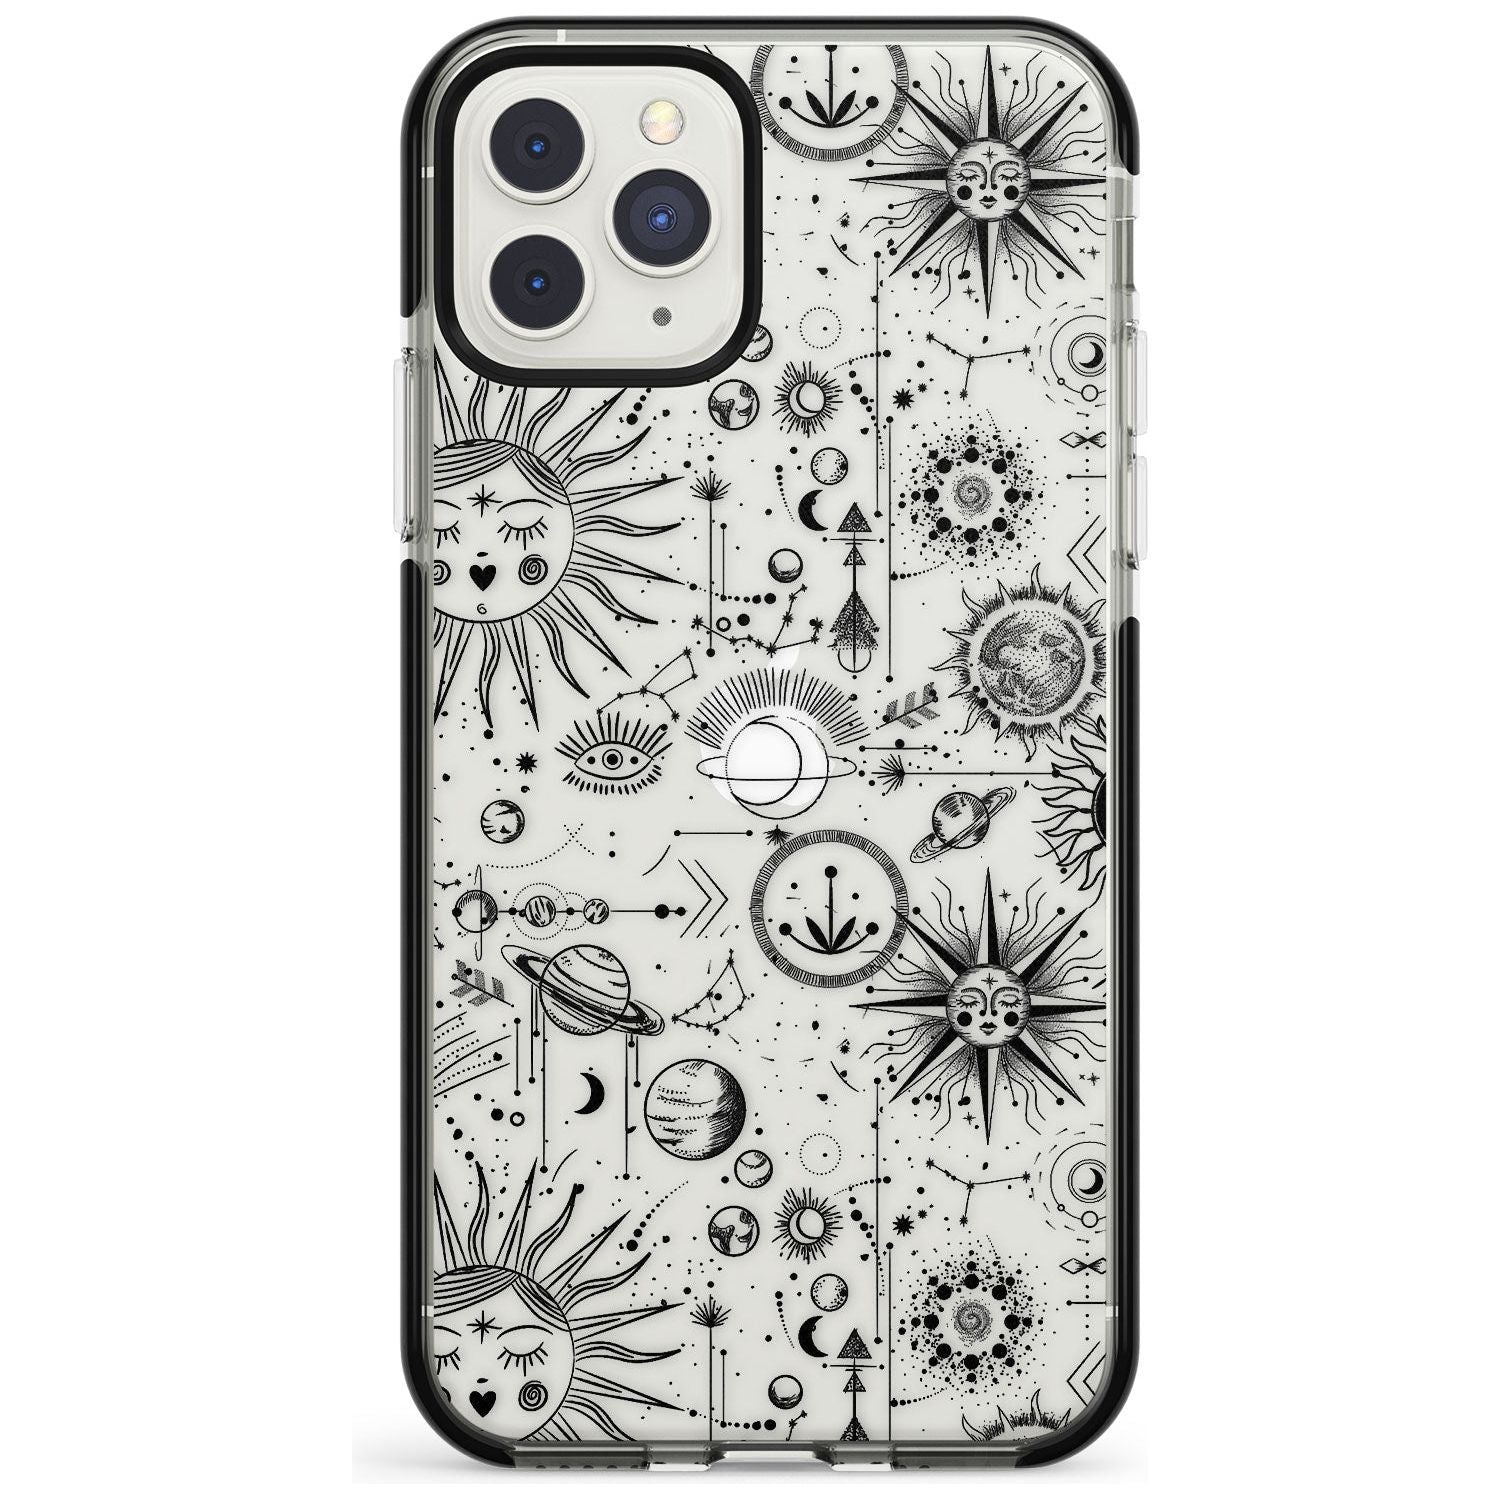 Suns & Planets Vintage Astrological Black Impact Phone Case for iPhone 11 Pro Max